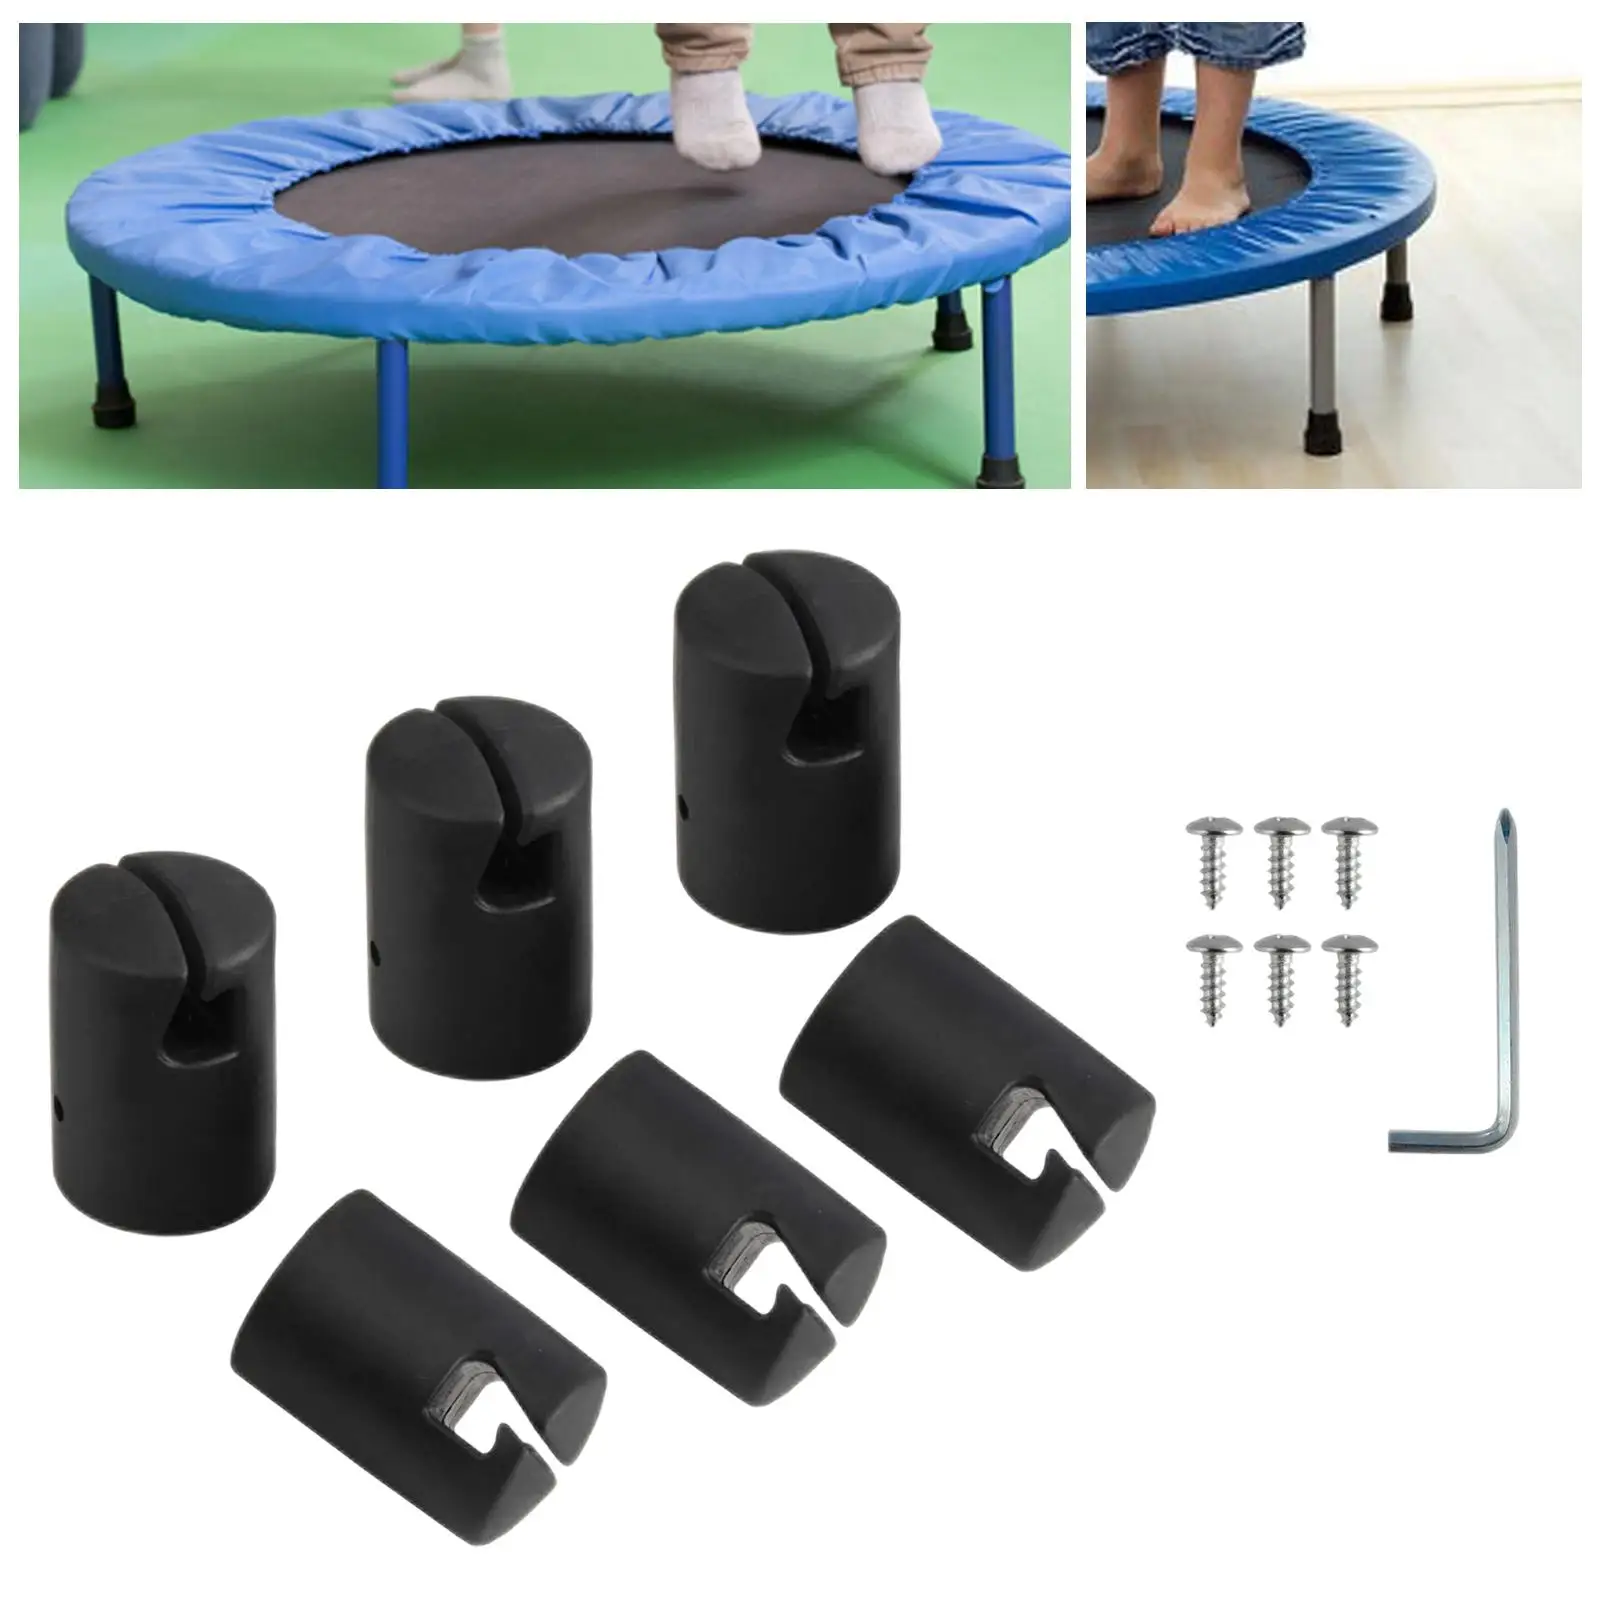 Trampoline Enclosure Pole CAPS with Screws Wrenches for Safety Trampoline Parts Supply